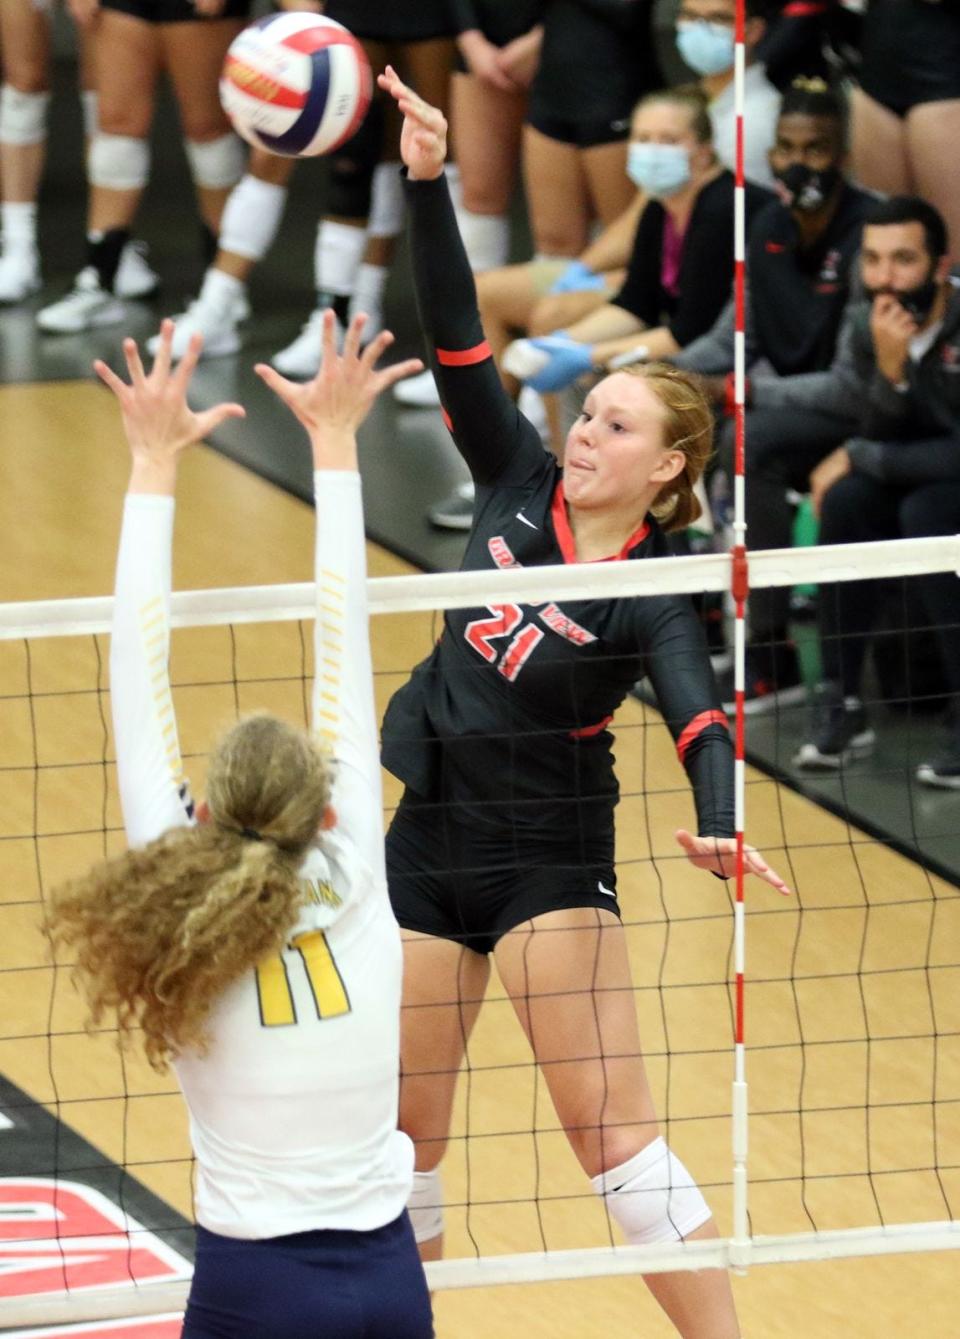 Grand View University sophomore outside hitter Emily Box, a graduate of Holy Trinity Catholic High School, averaged 3.46 kills and helped the Vikings to a 14-0 record in the fall season.